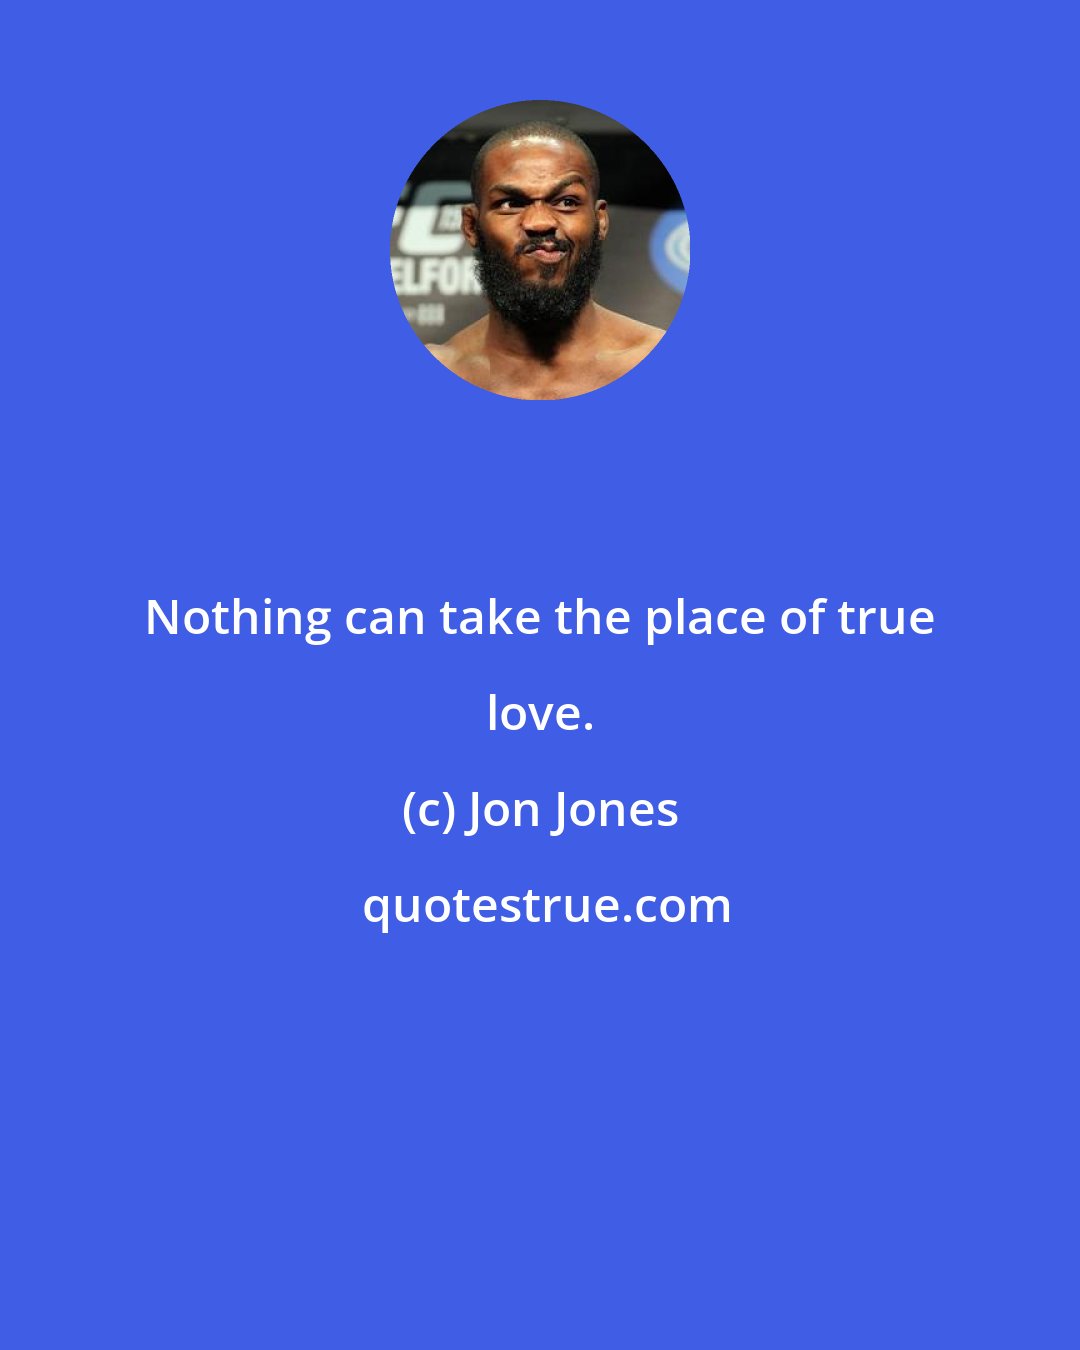 Jon Jones: Nothing can take the place of true love.